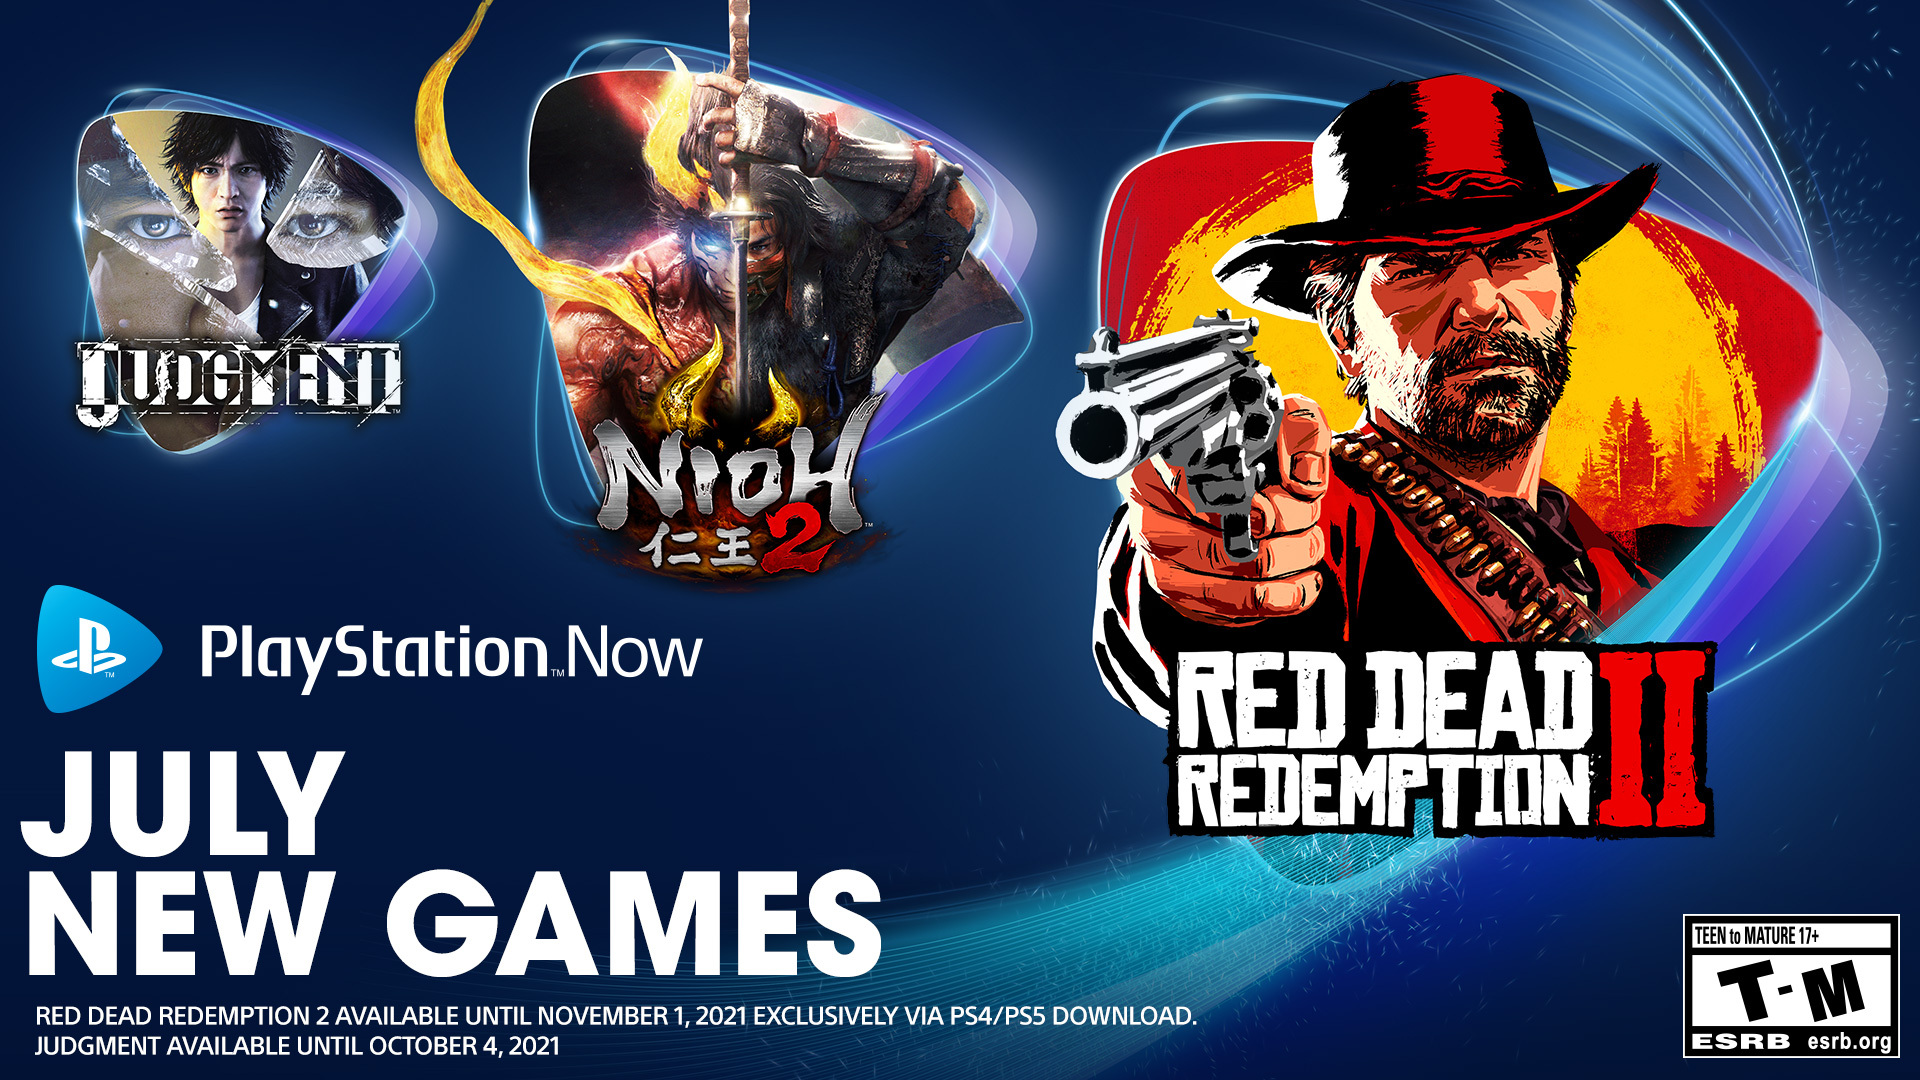 on Twitter: "New PlayStation Now games for July include Dead 2, Nioh 2, and Judgment. Full details: https://t.co/42IfJU7CN7 https://t.co/WgQT3DJHgs" Twitter